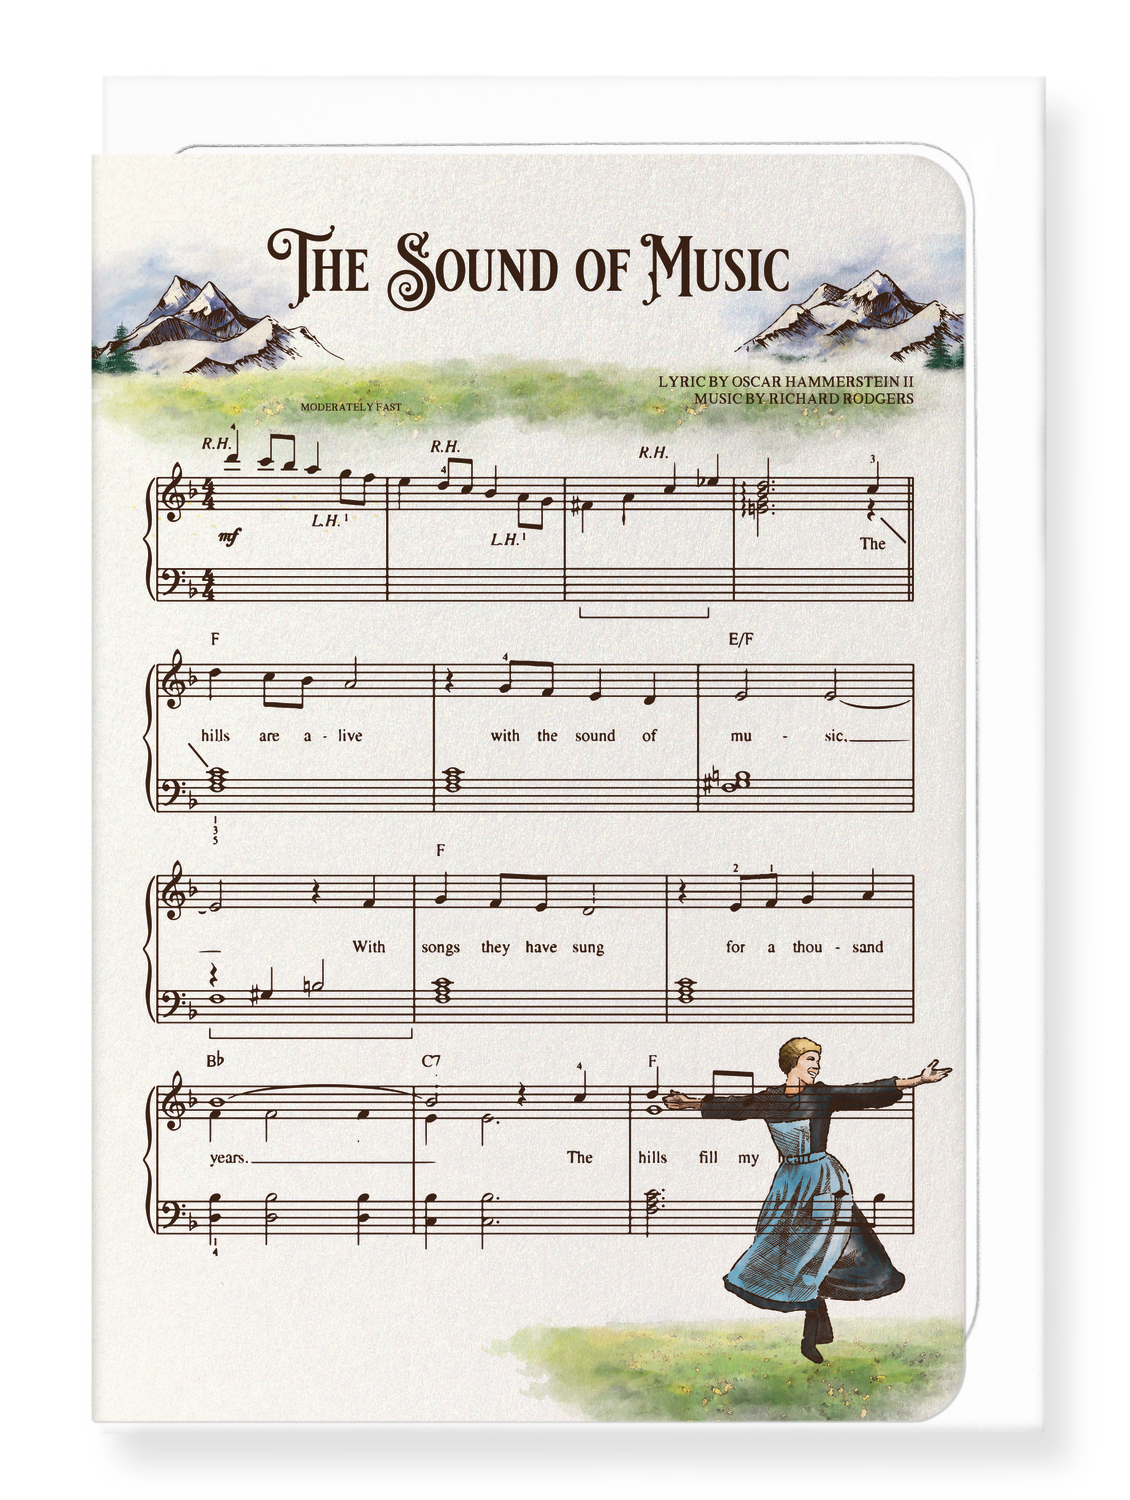 Ezen Designs - Sound of music - Greeting Card - Front